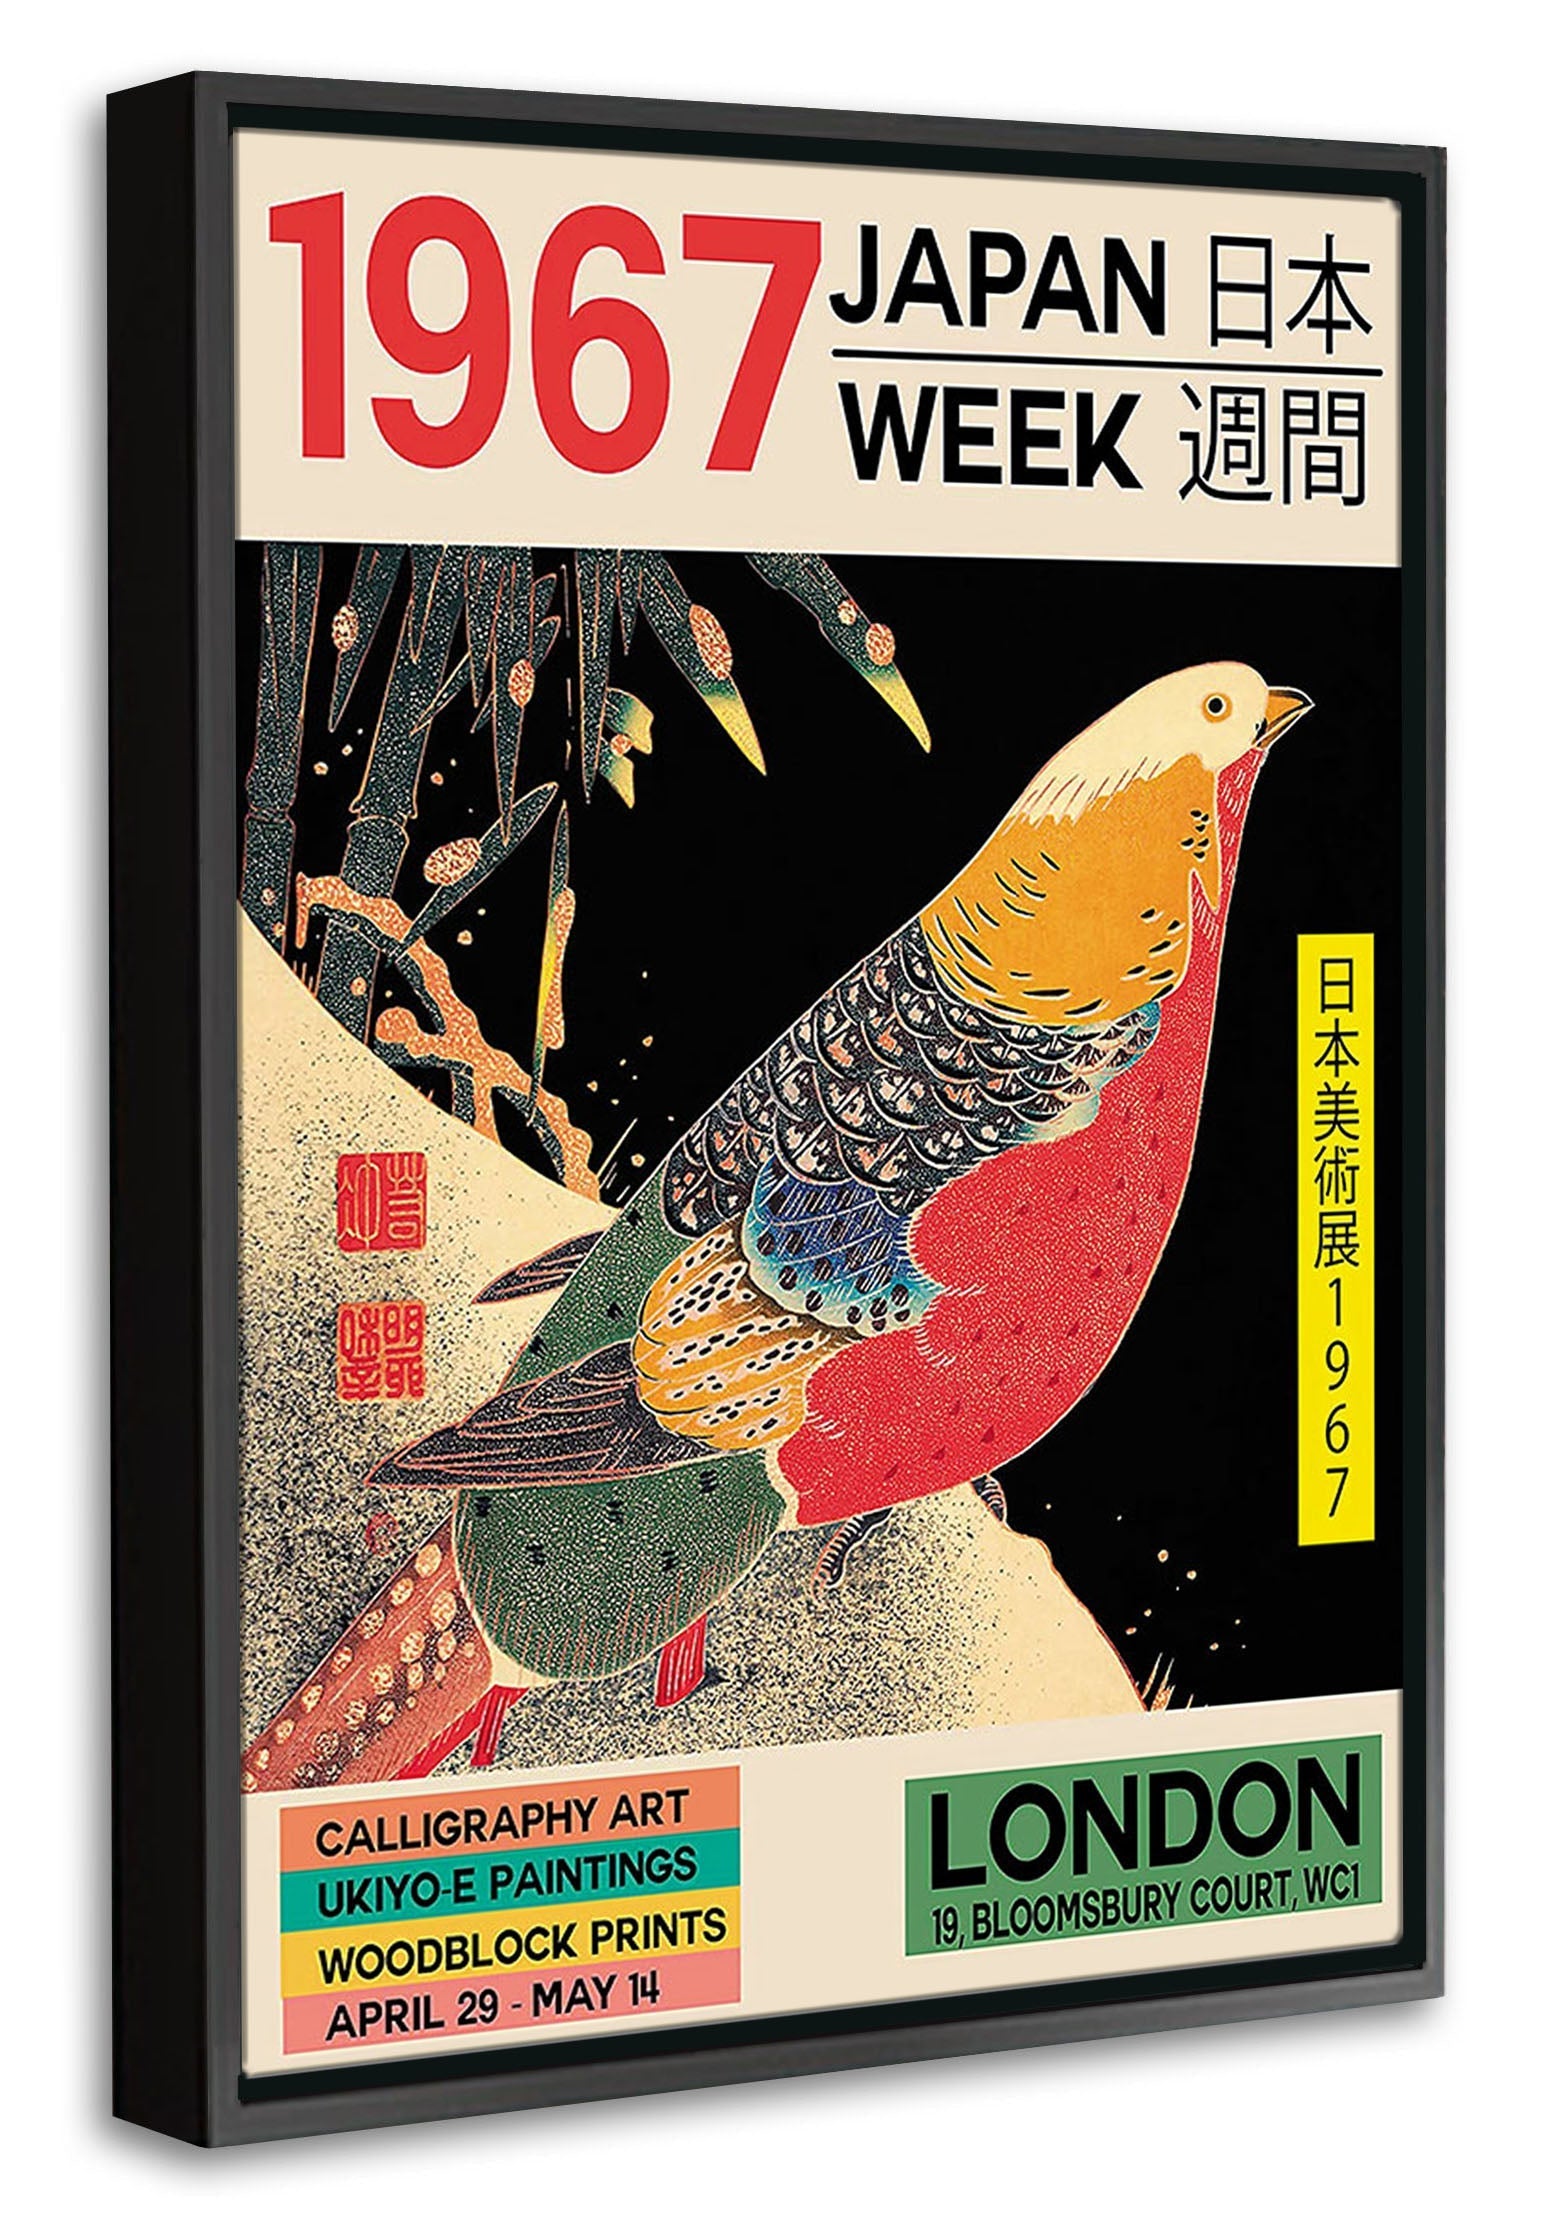 1967 Japan Week-expositions, print-Canvas Print with Box Frame-40 x 60 cm-BLUE SHAKER